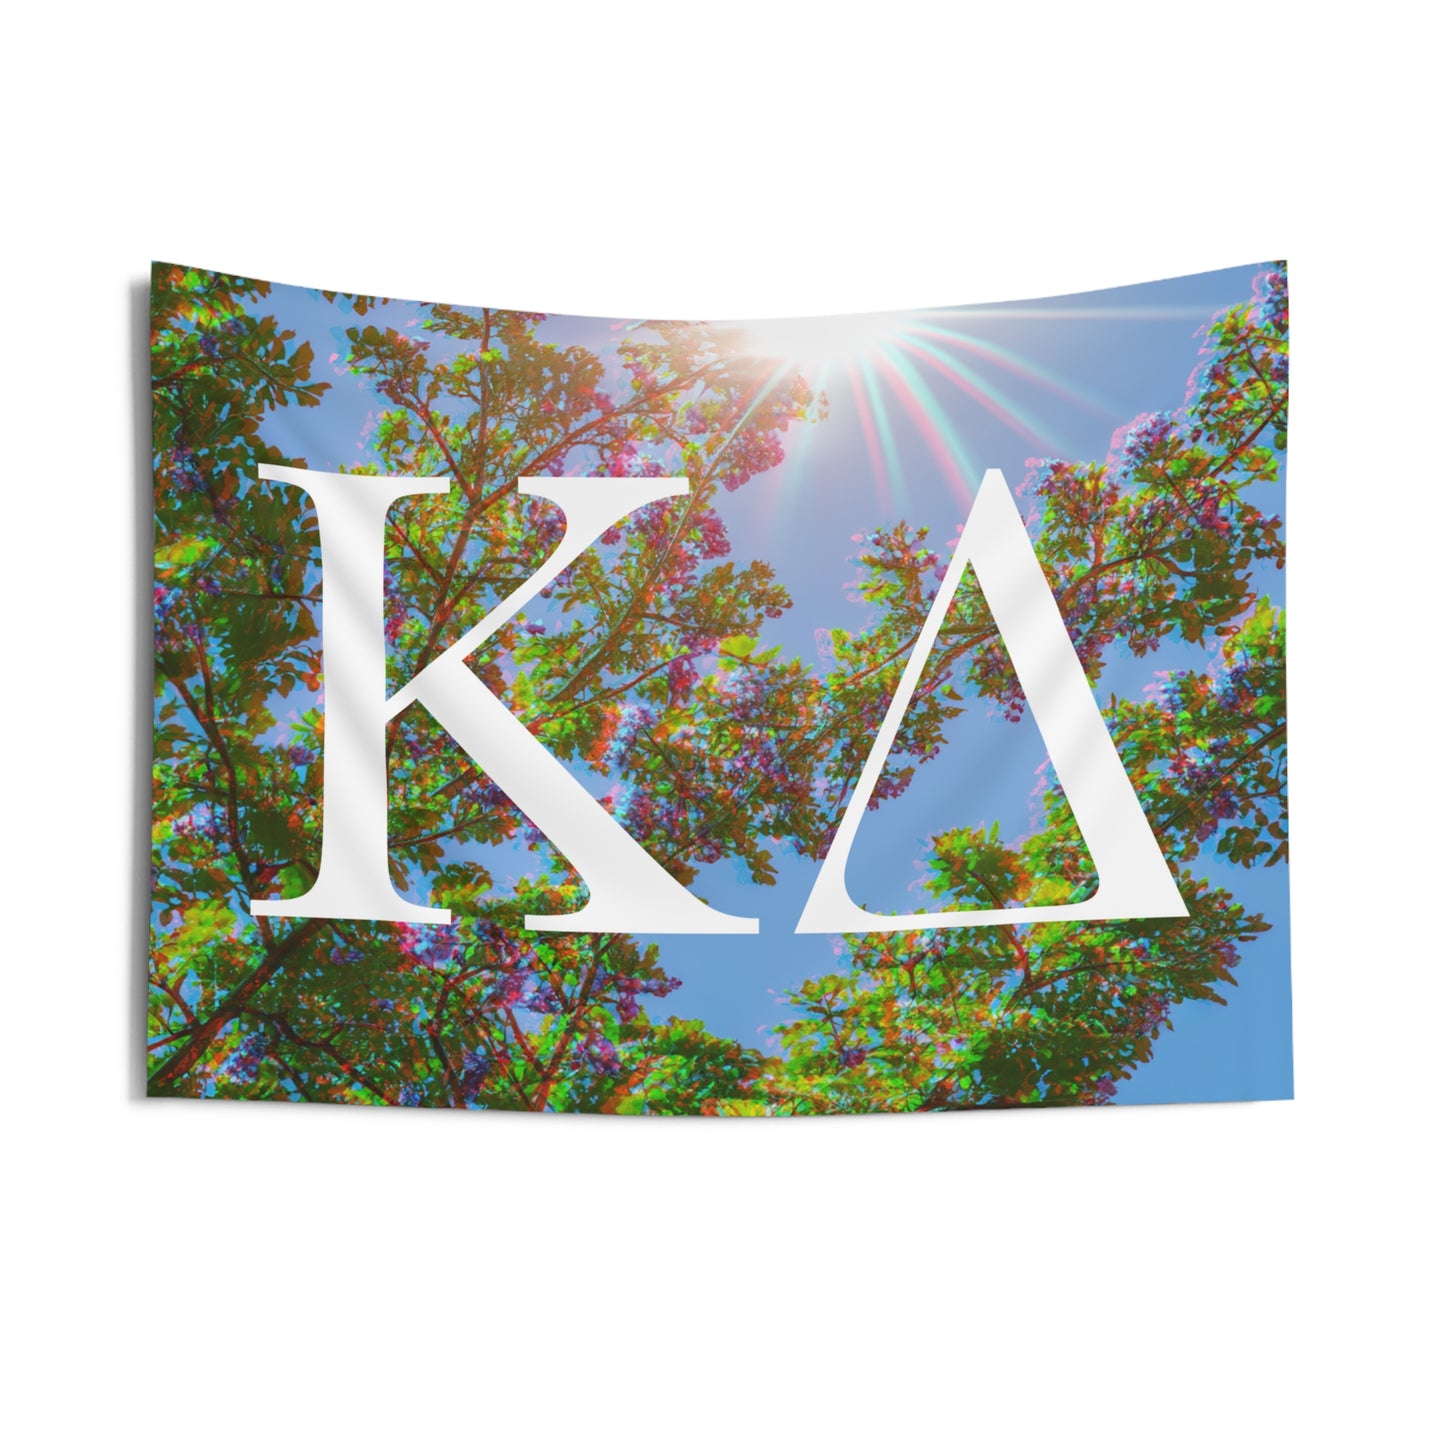 Kappa Delta Distorted Purple Flowers Wall Flag Sorority Home Decoration for Dorms & Apartments